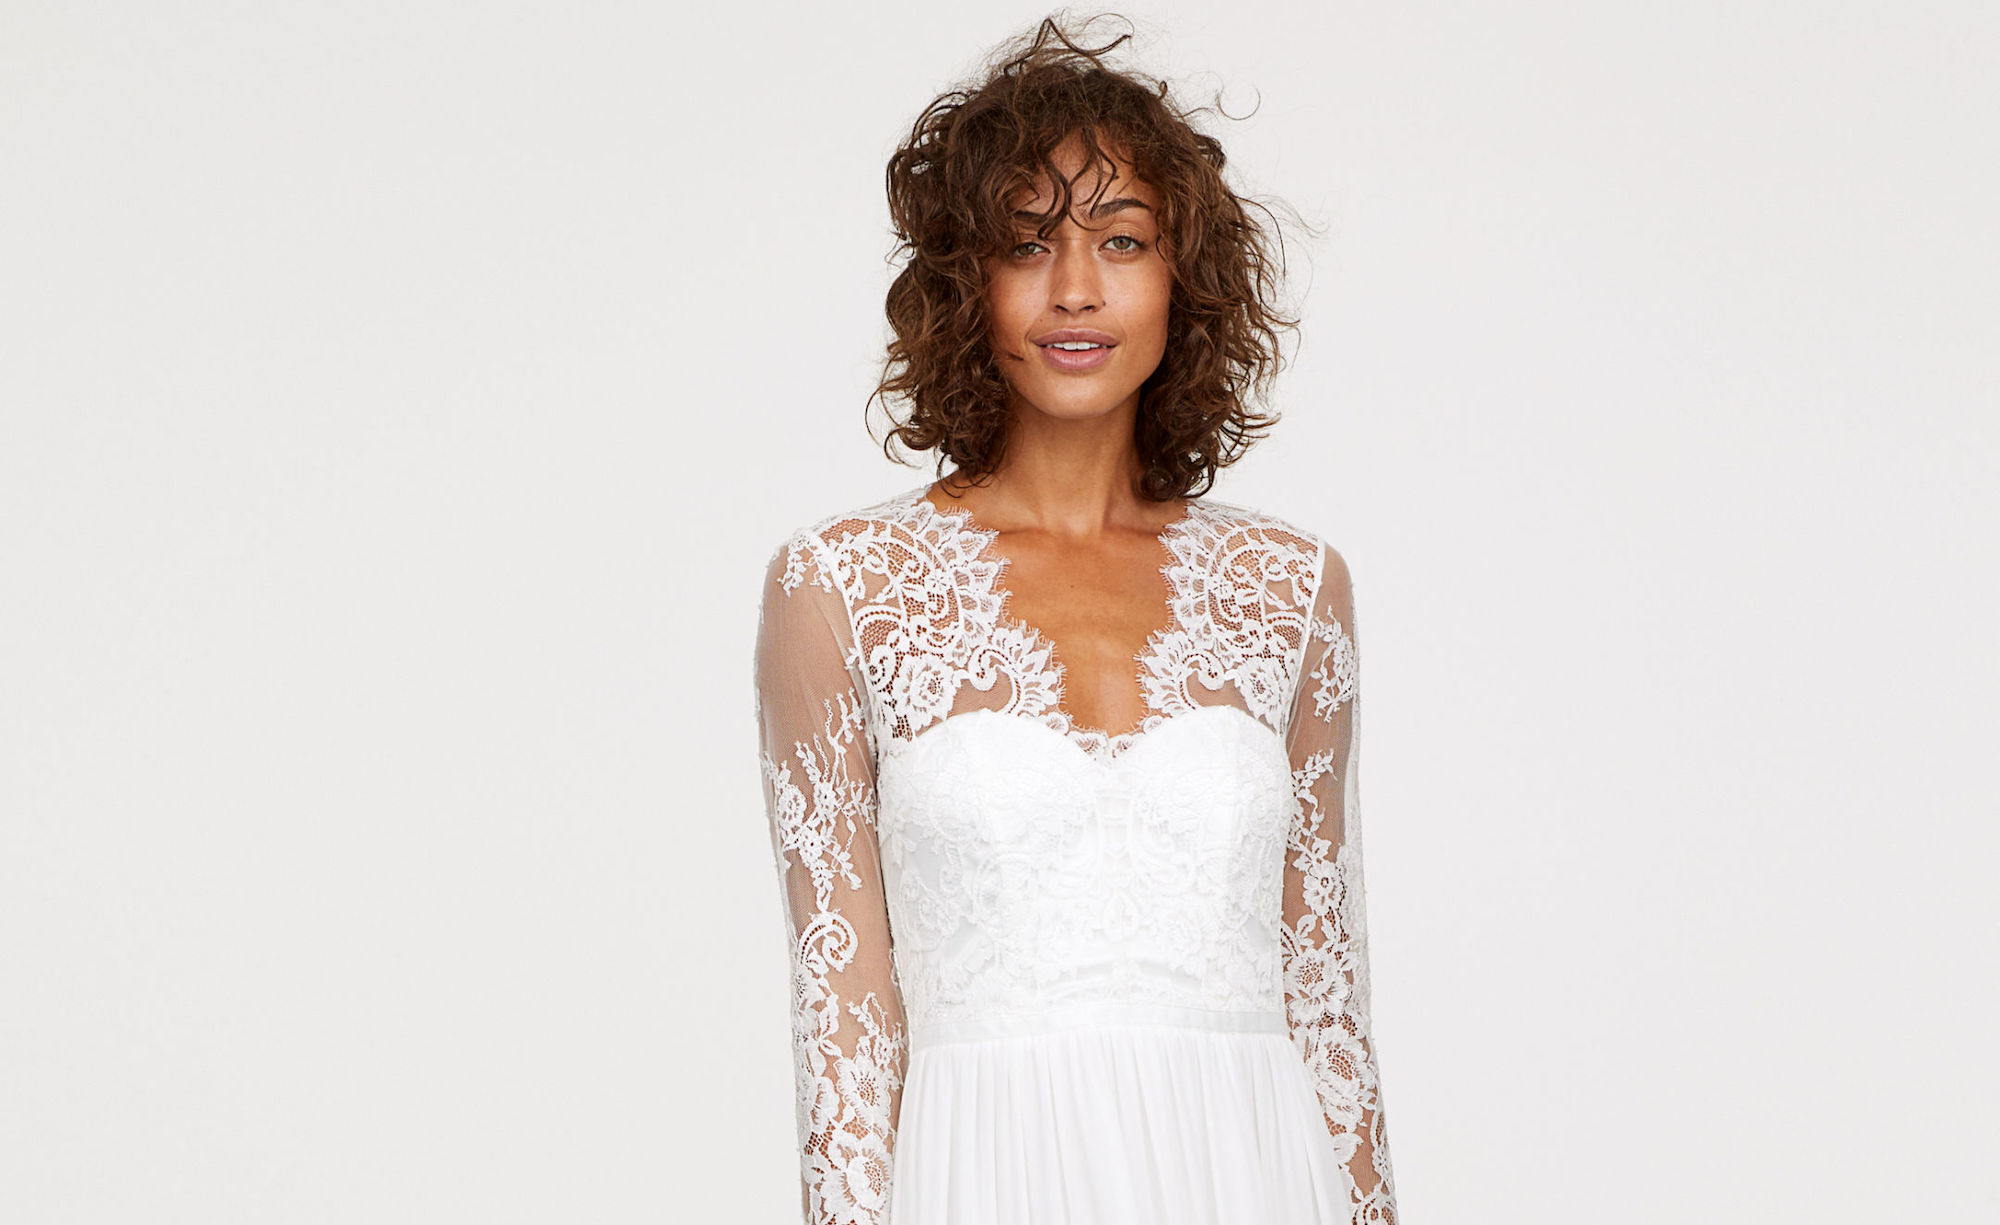 The New H&M Wedding Dress Collection Is Absolutely Dreamy